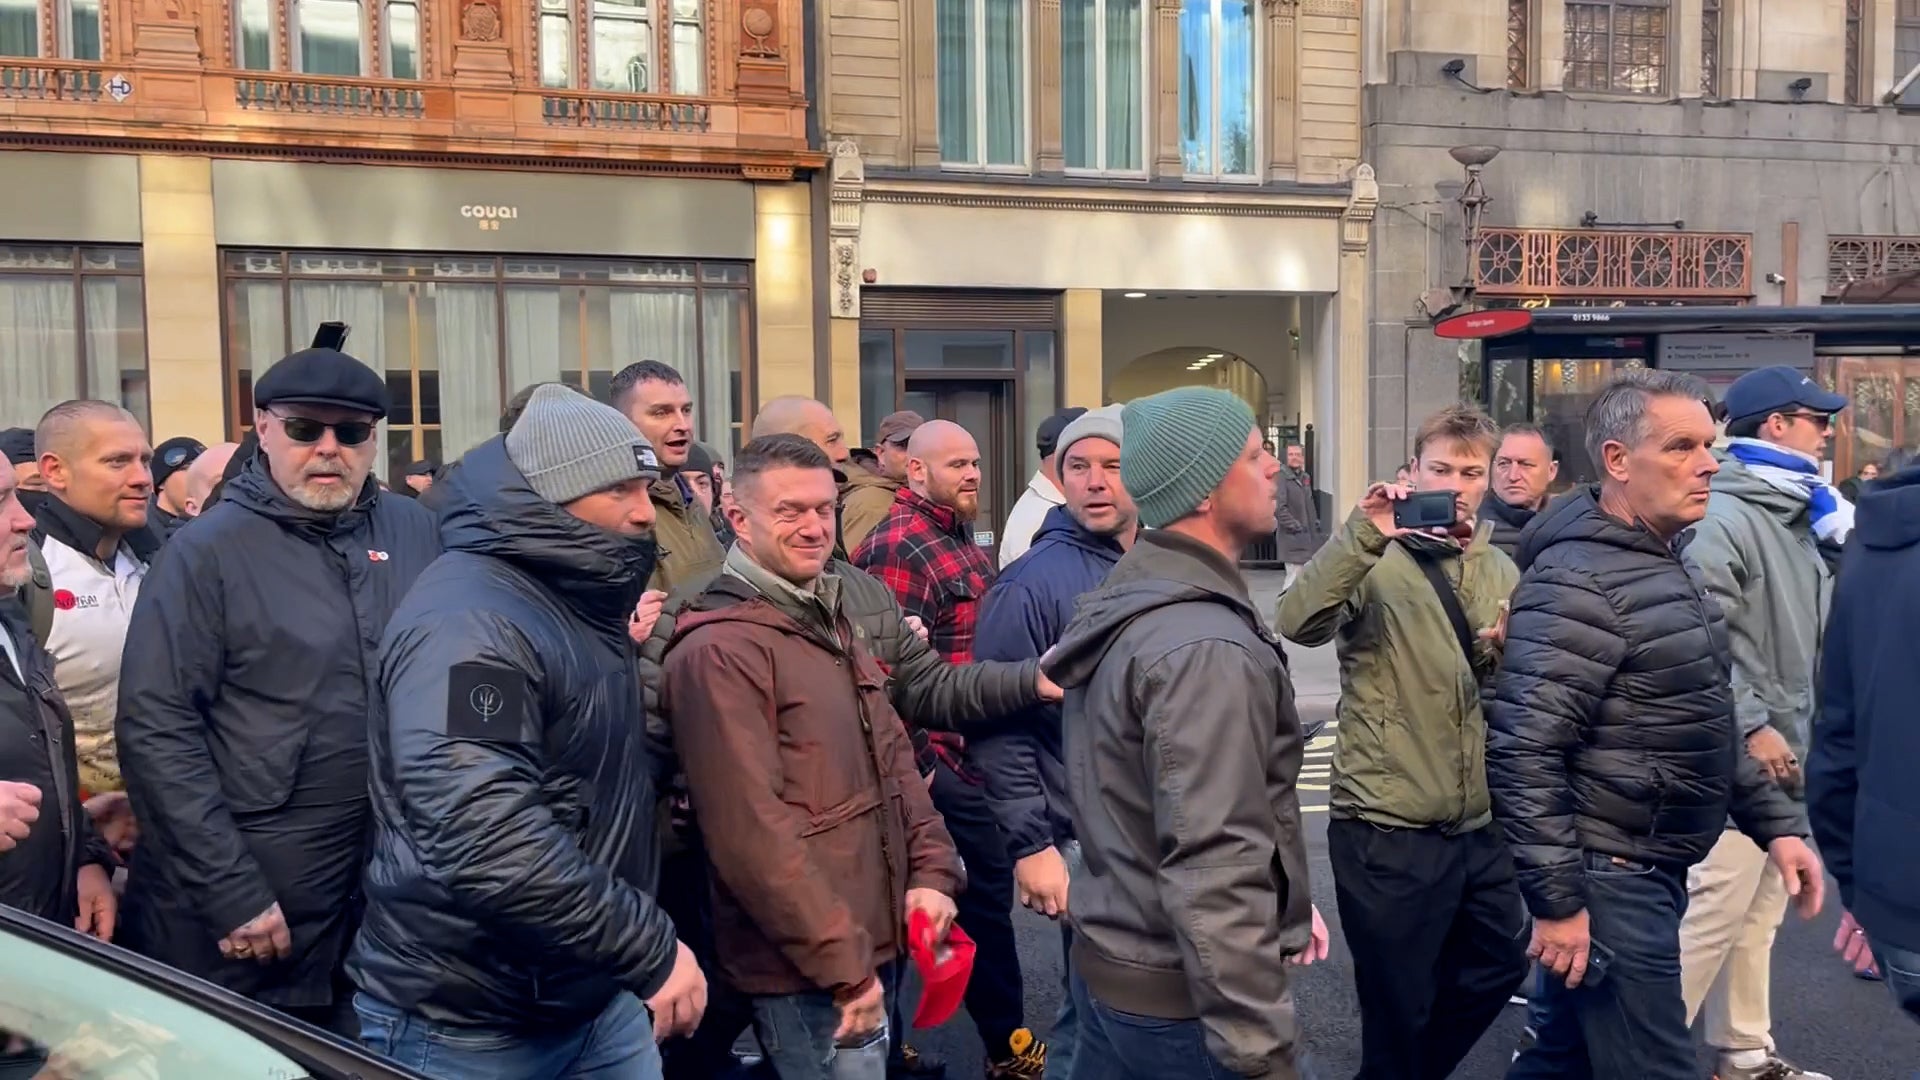 English Defence League founder Tommy Robinson was seen in Chinatown after earlier issuing calls to protect the Cenotaph